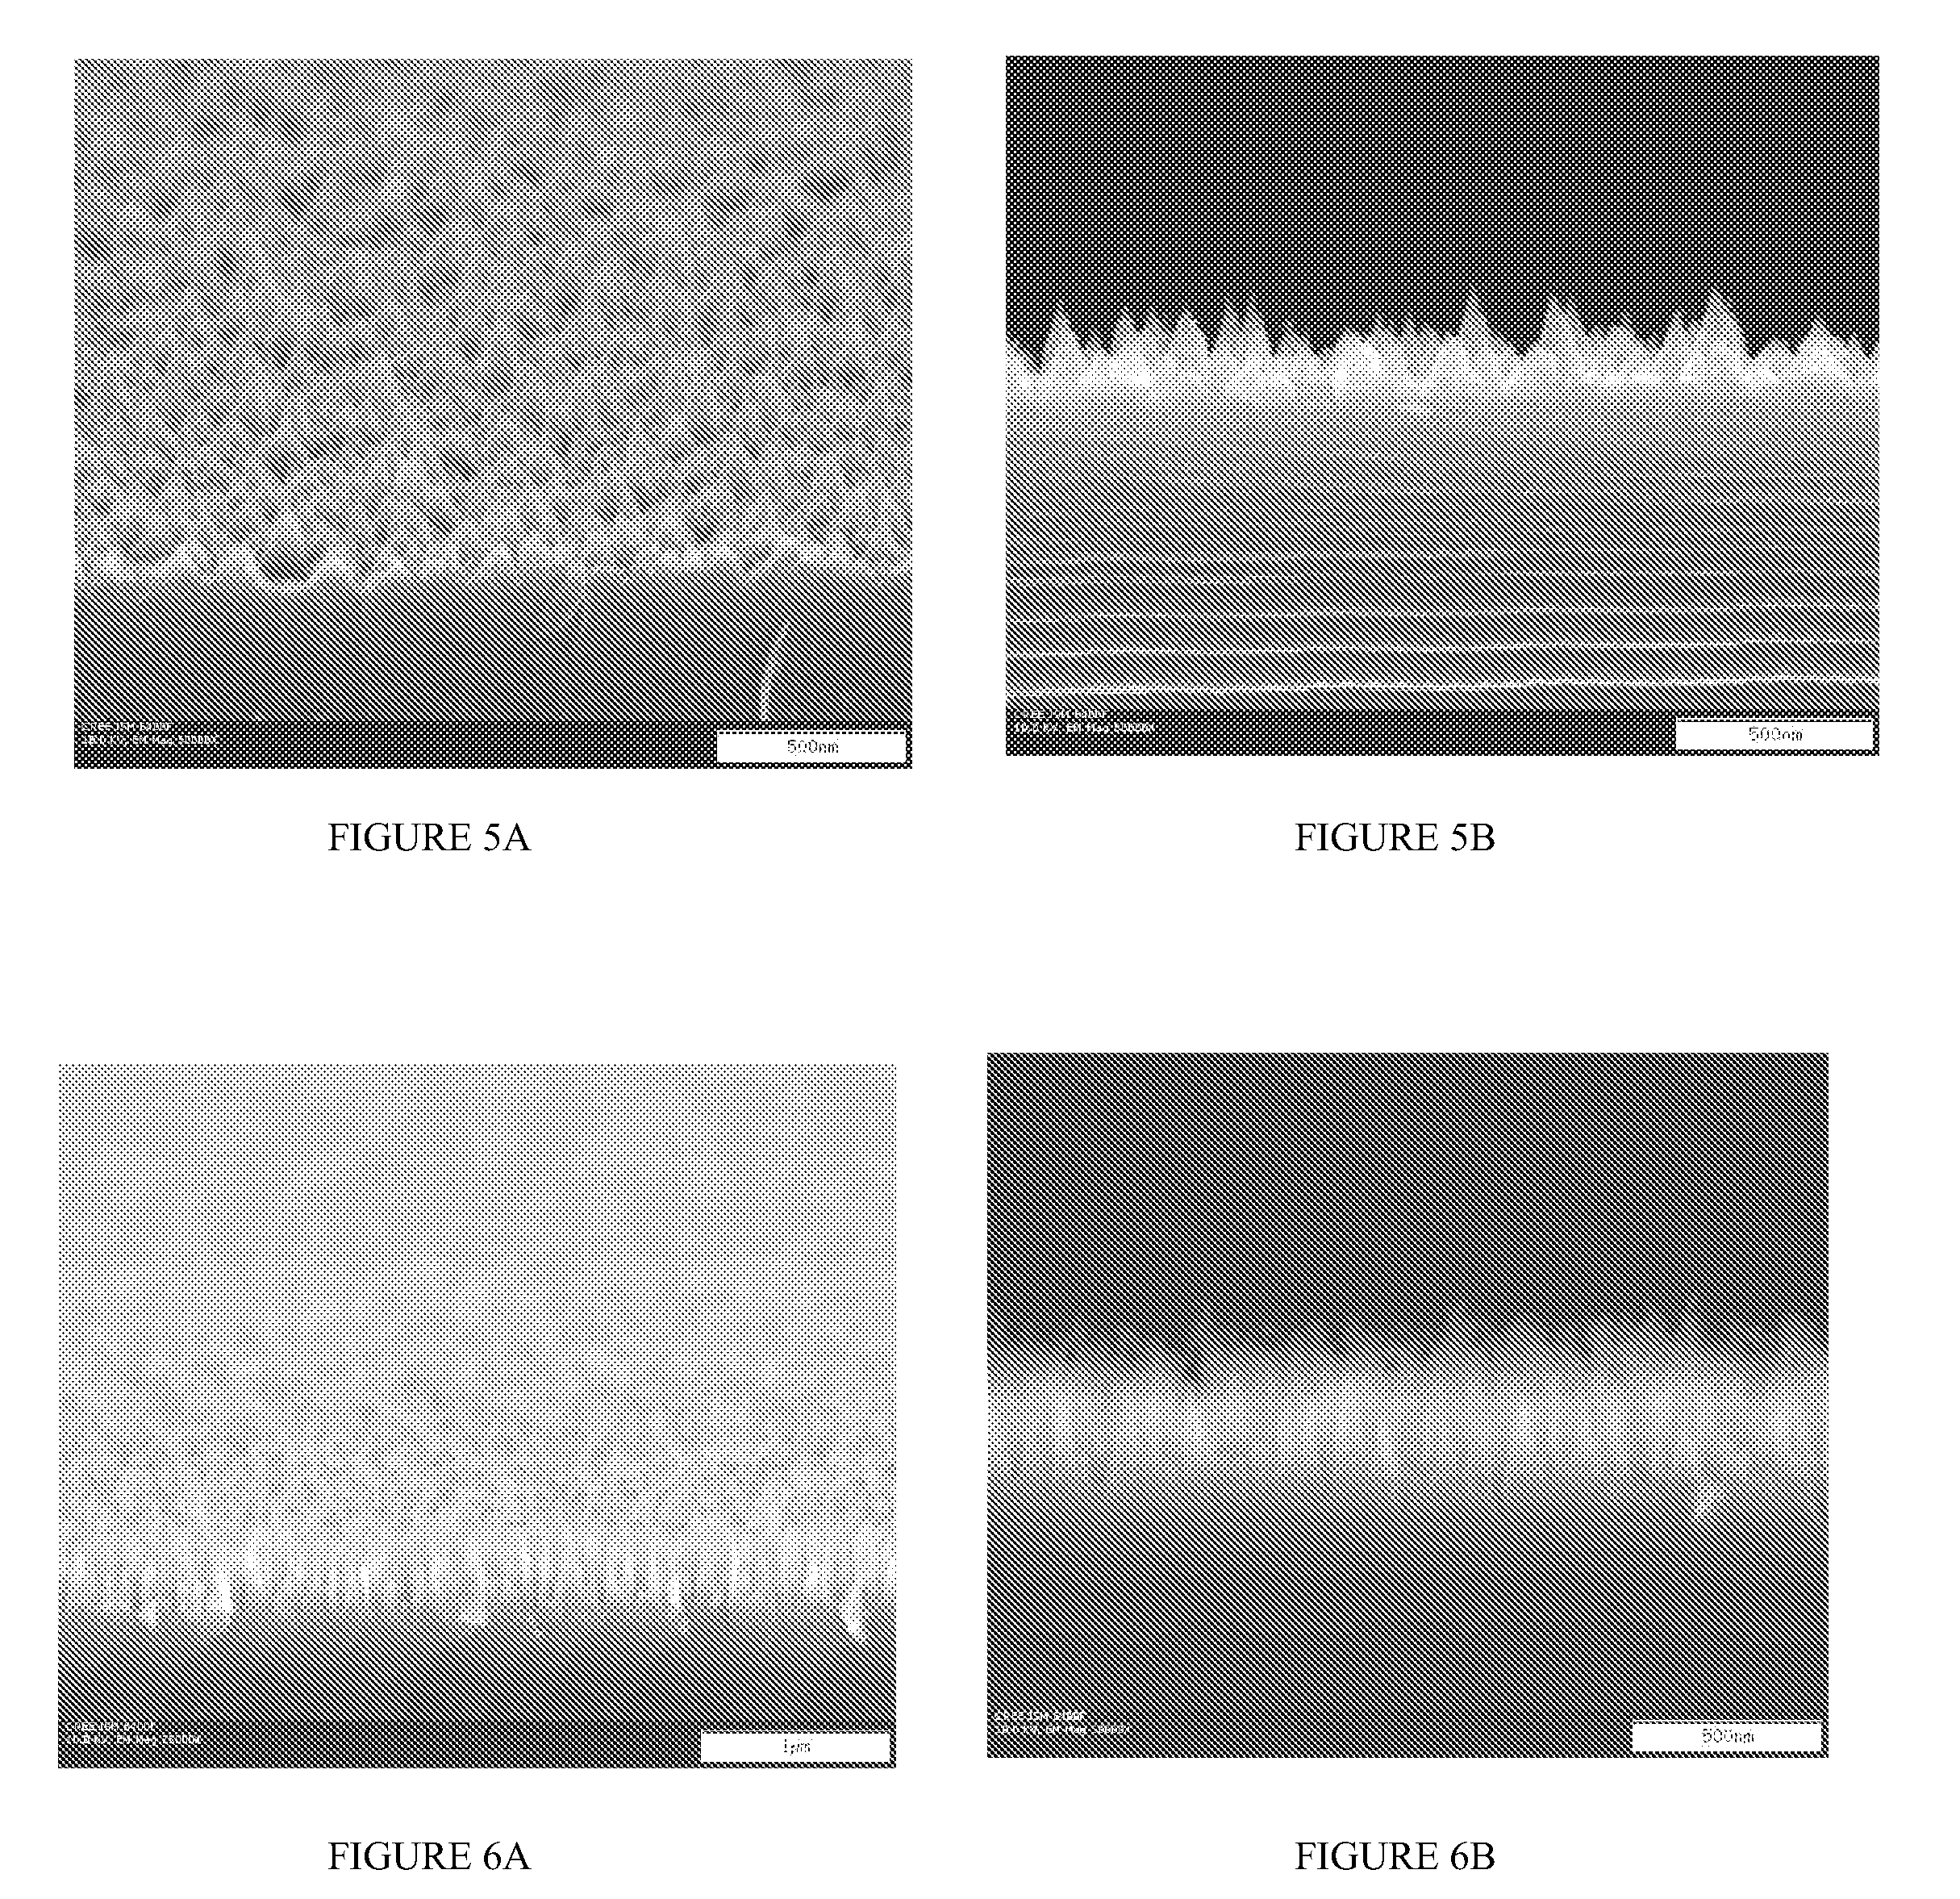 Semiconductor Devices Having Low Threading Dislocations and Improved Light Extraction and Methods of Making the Same